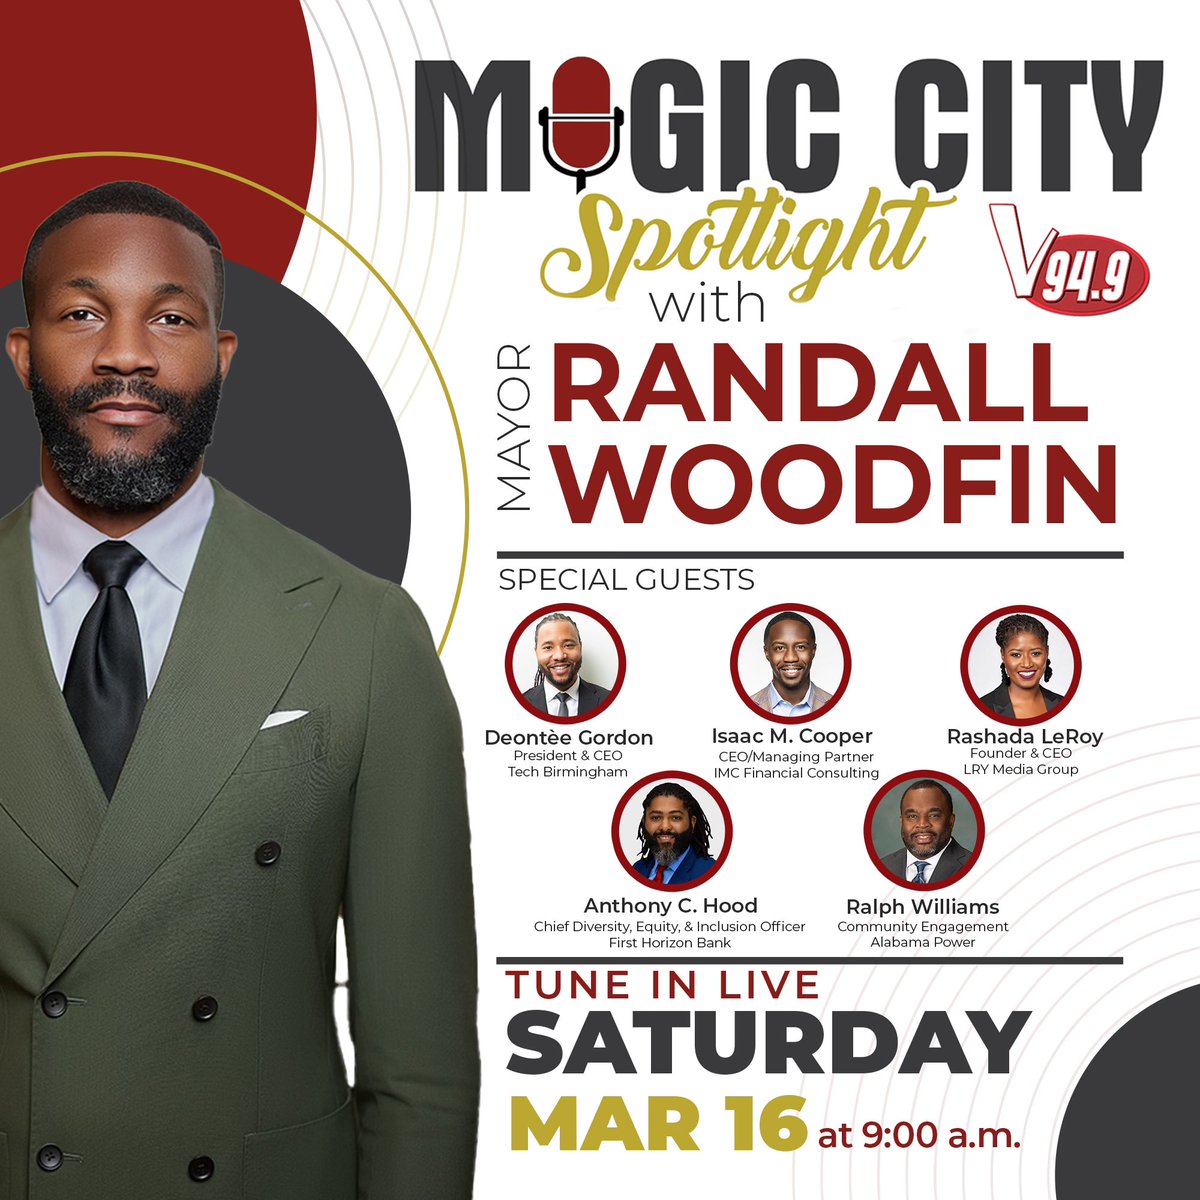 This week on the Magic City Spotlight, we’re sharing the mic with some of our city’s best and brightest. You won’t want to miss this convo with many of our city’s most creative minds and forward-thinking leaders. Tune in at 9 a.m. this Saturday on v94.9fm!